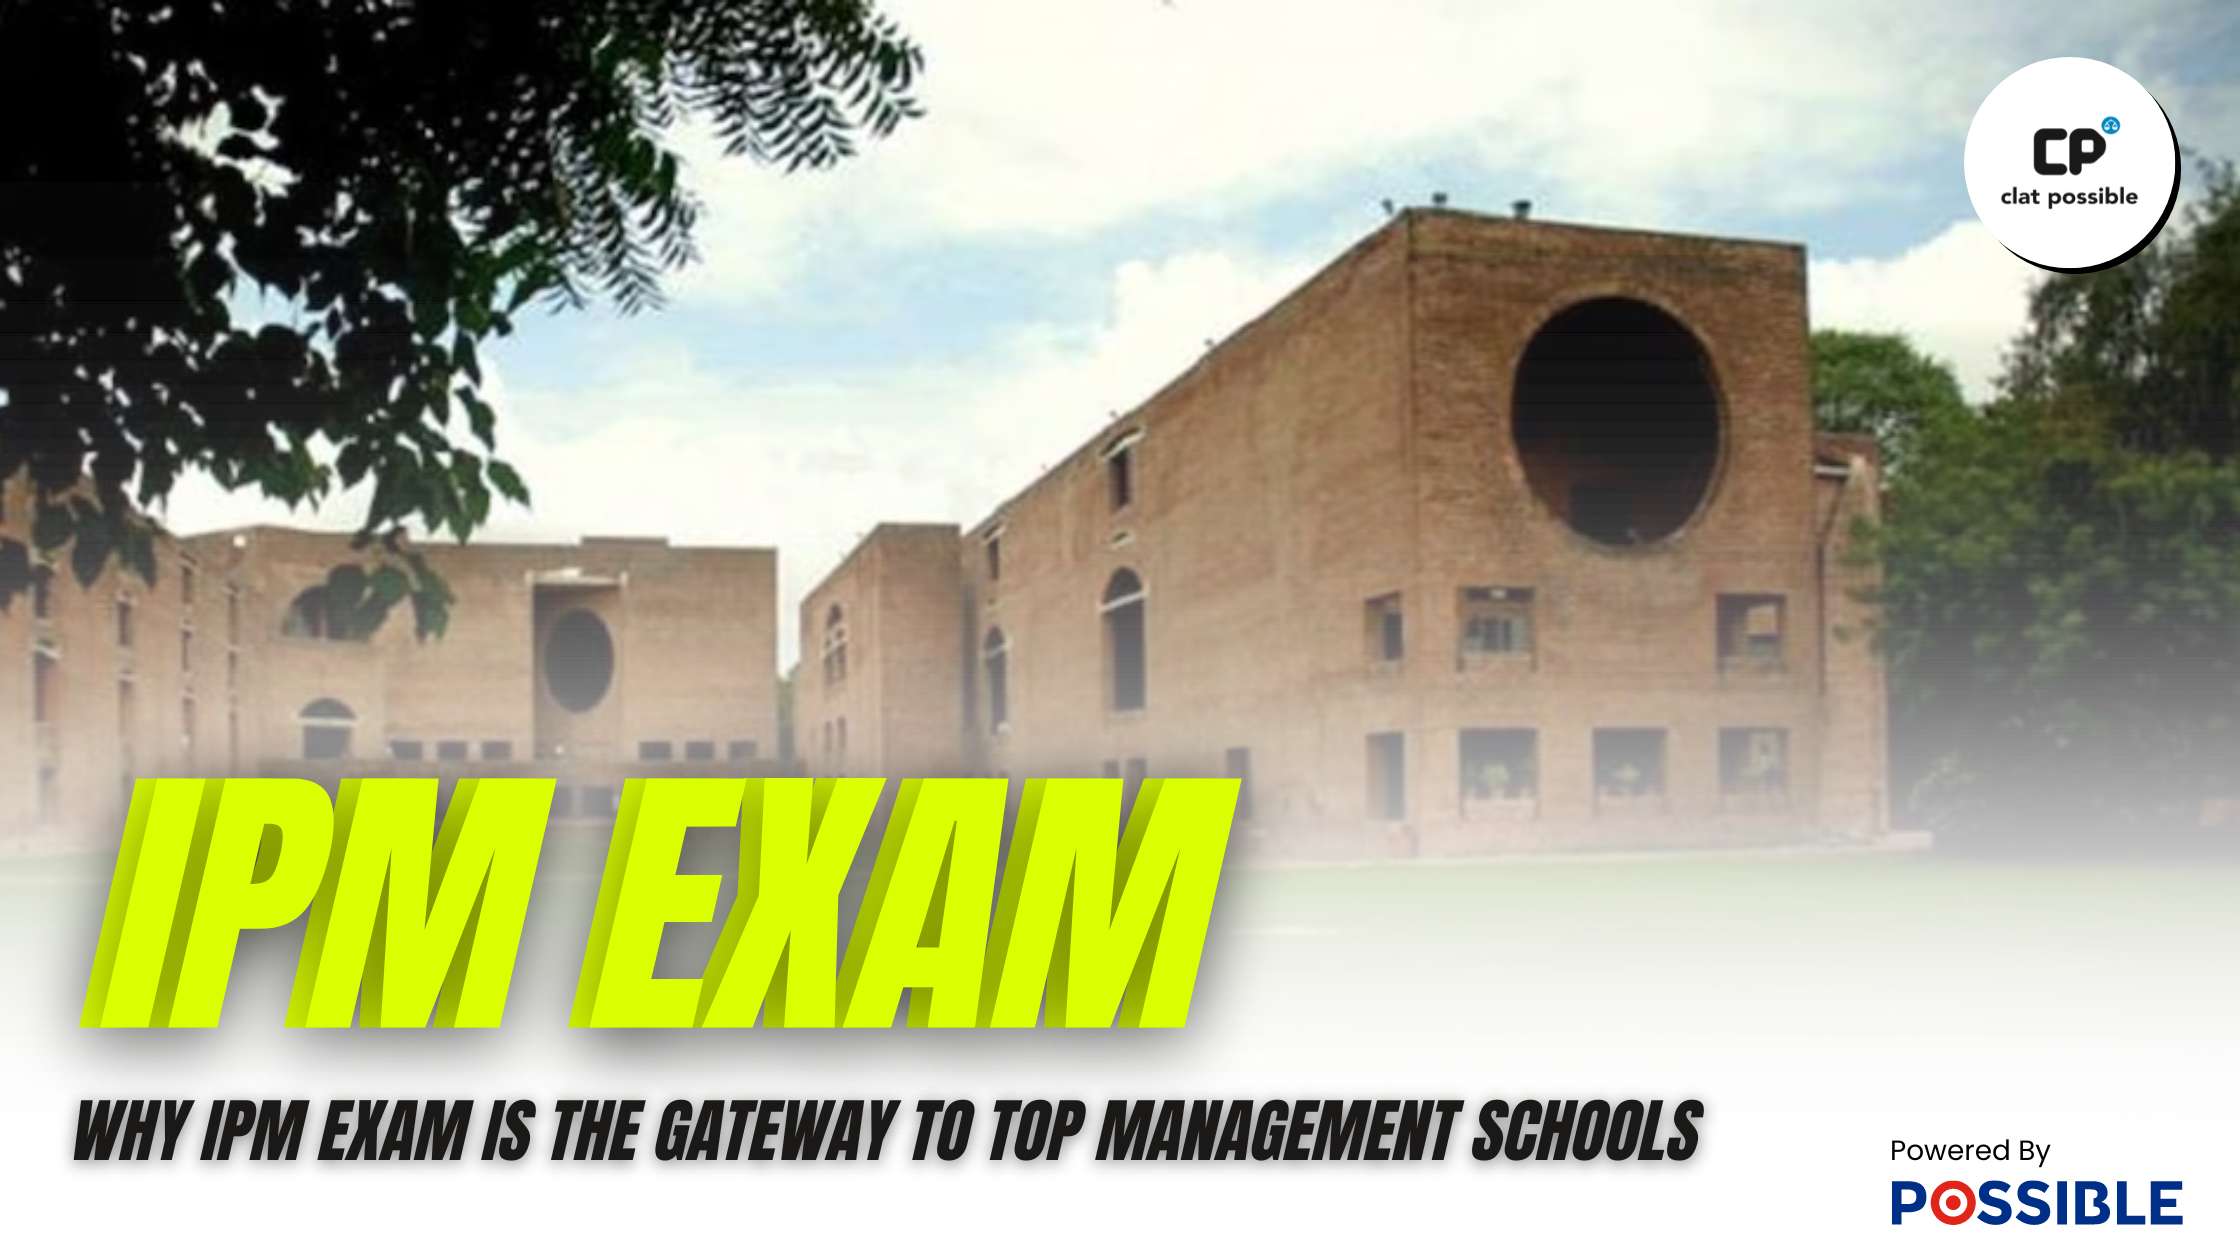 Why IPM Exam is the Gateway to Top Management Schools